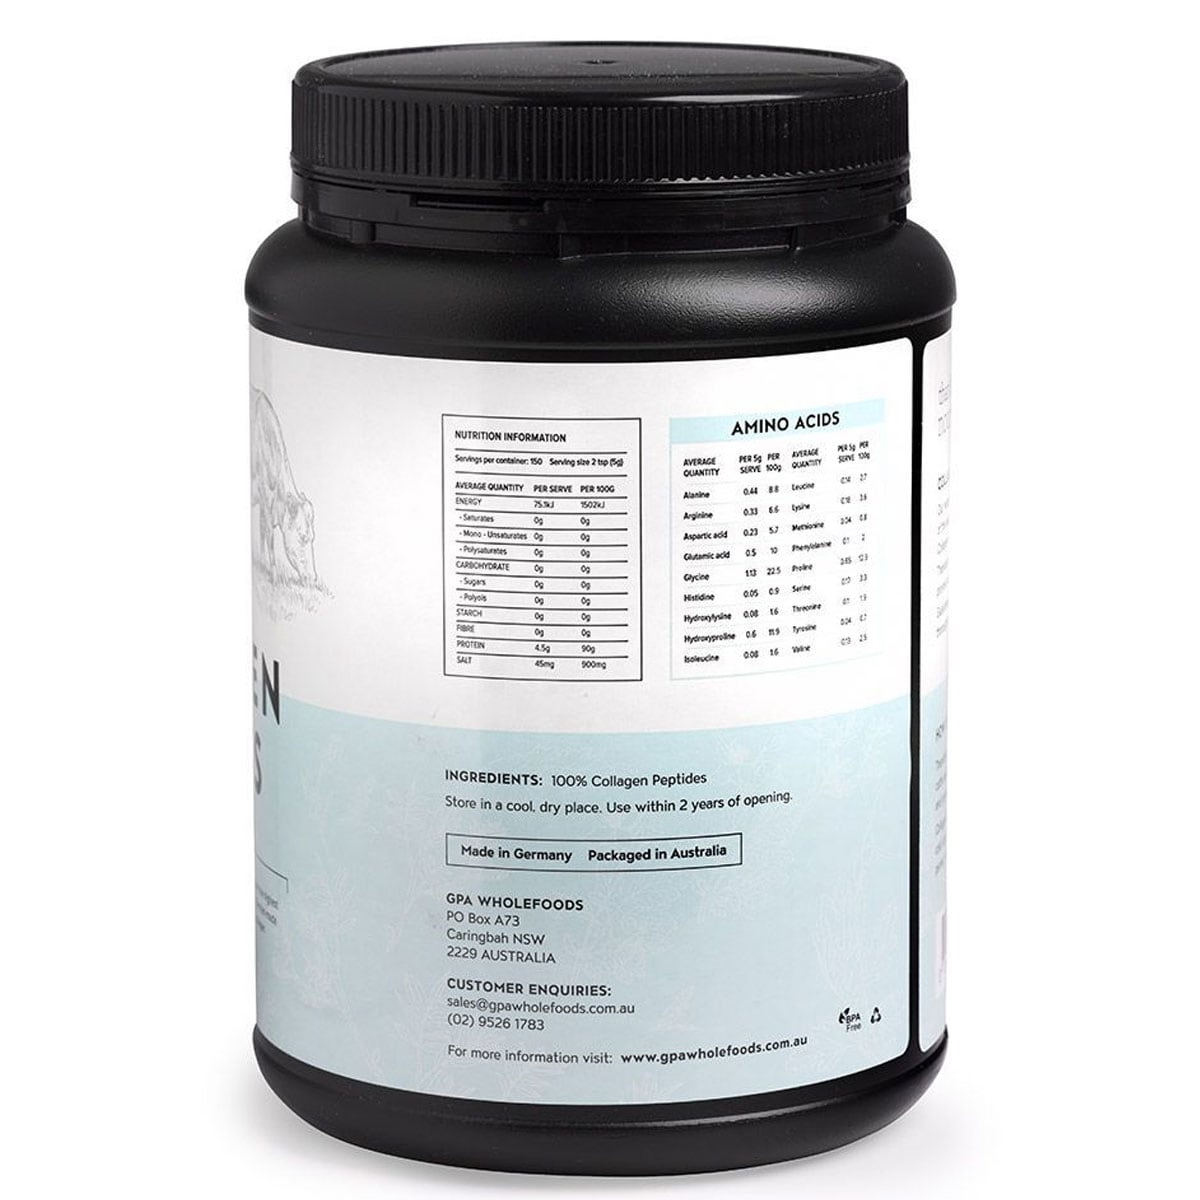 Thankfully Nourished Collagen Peptides 700G